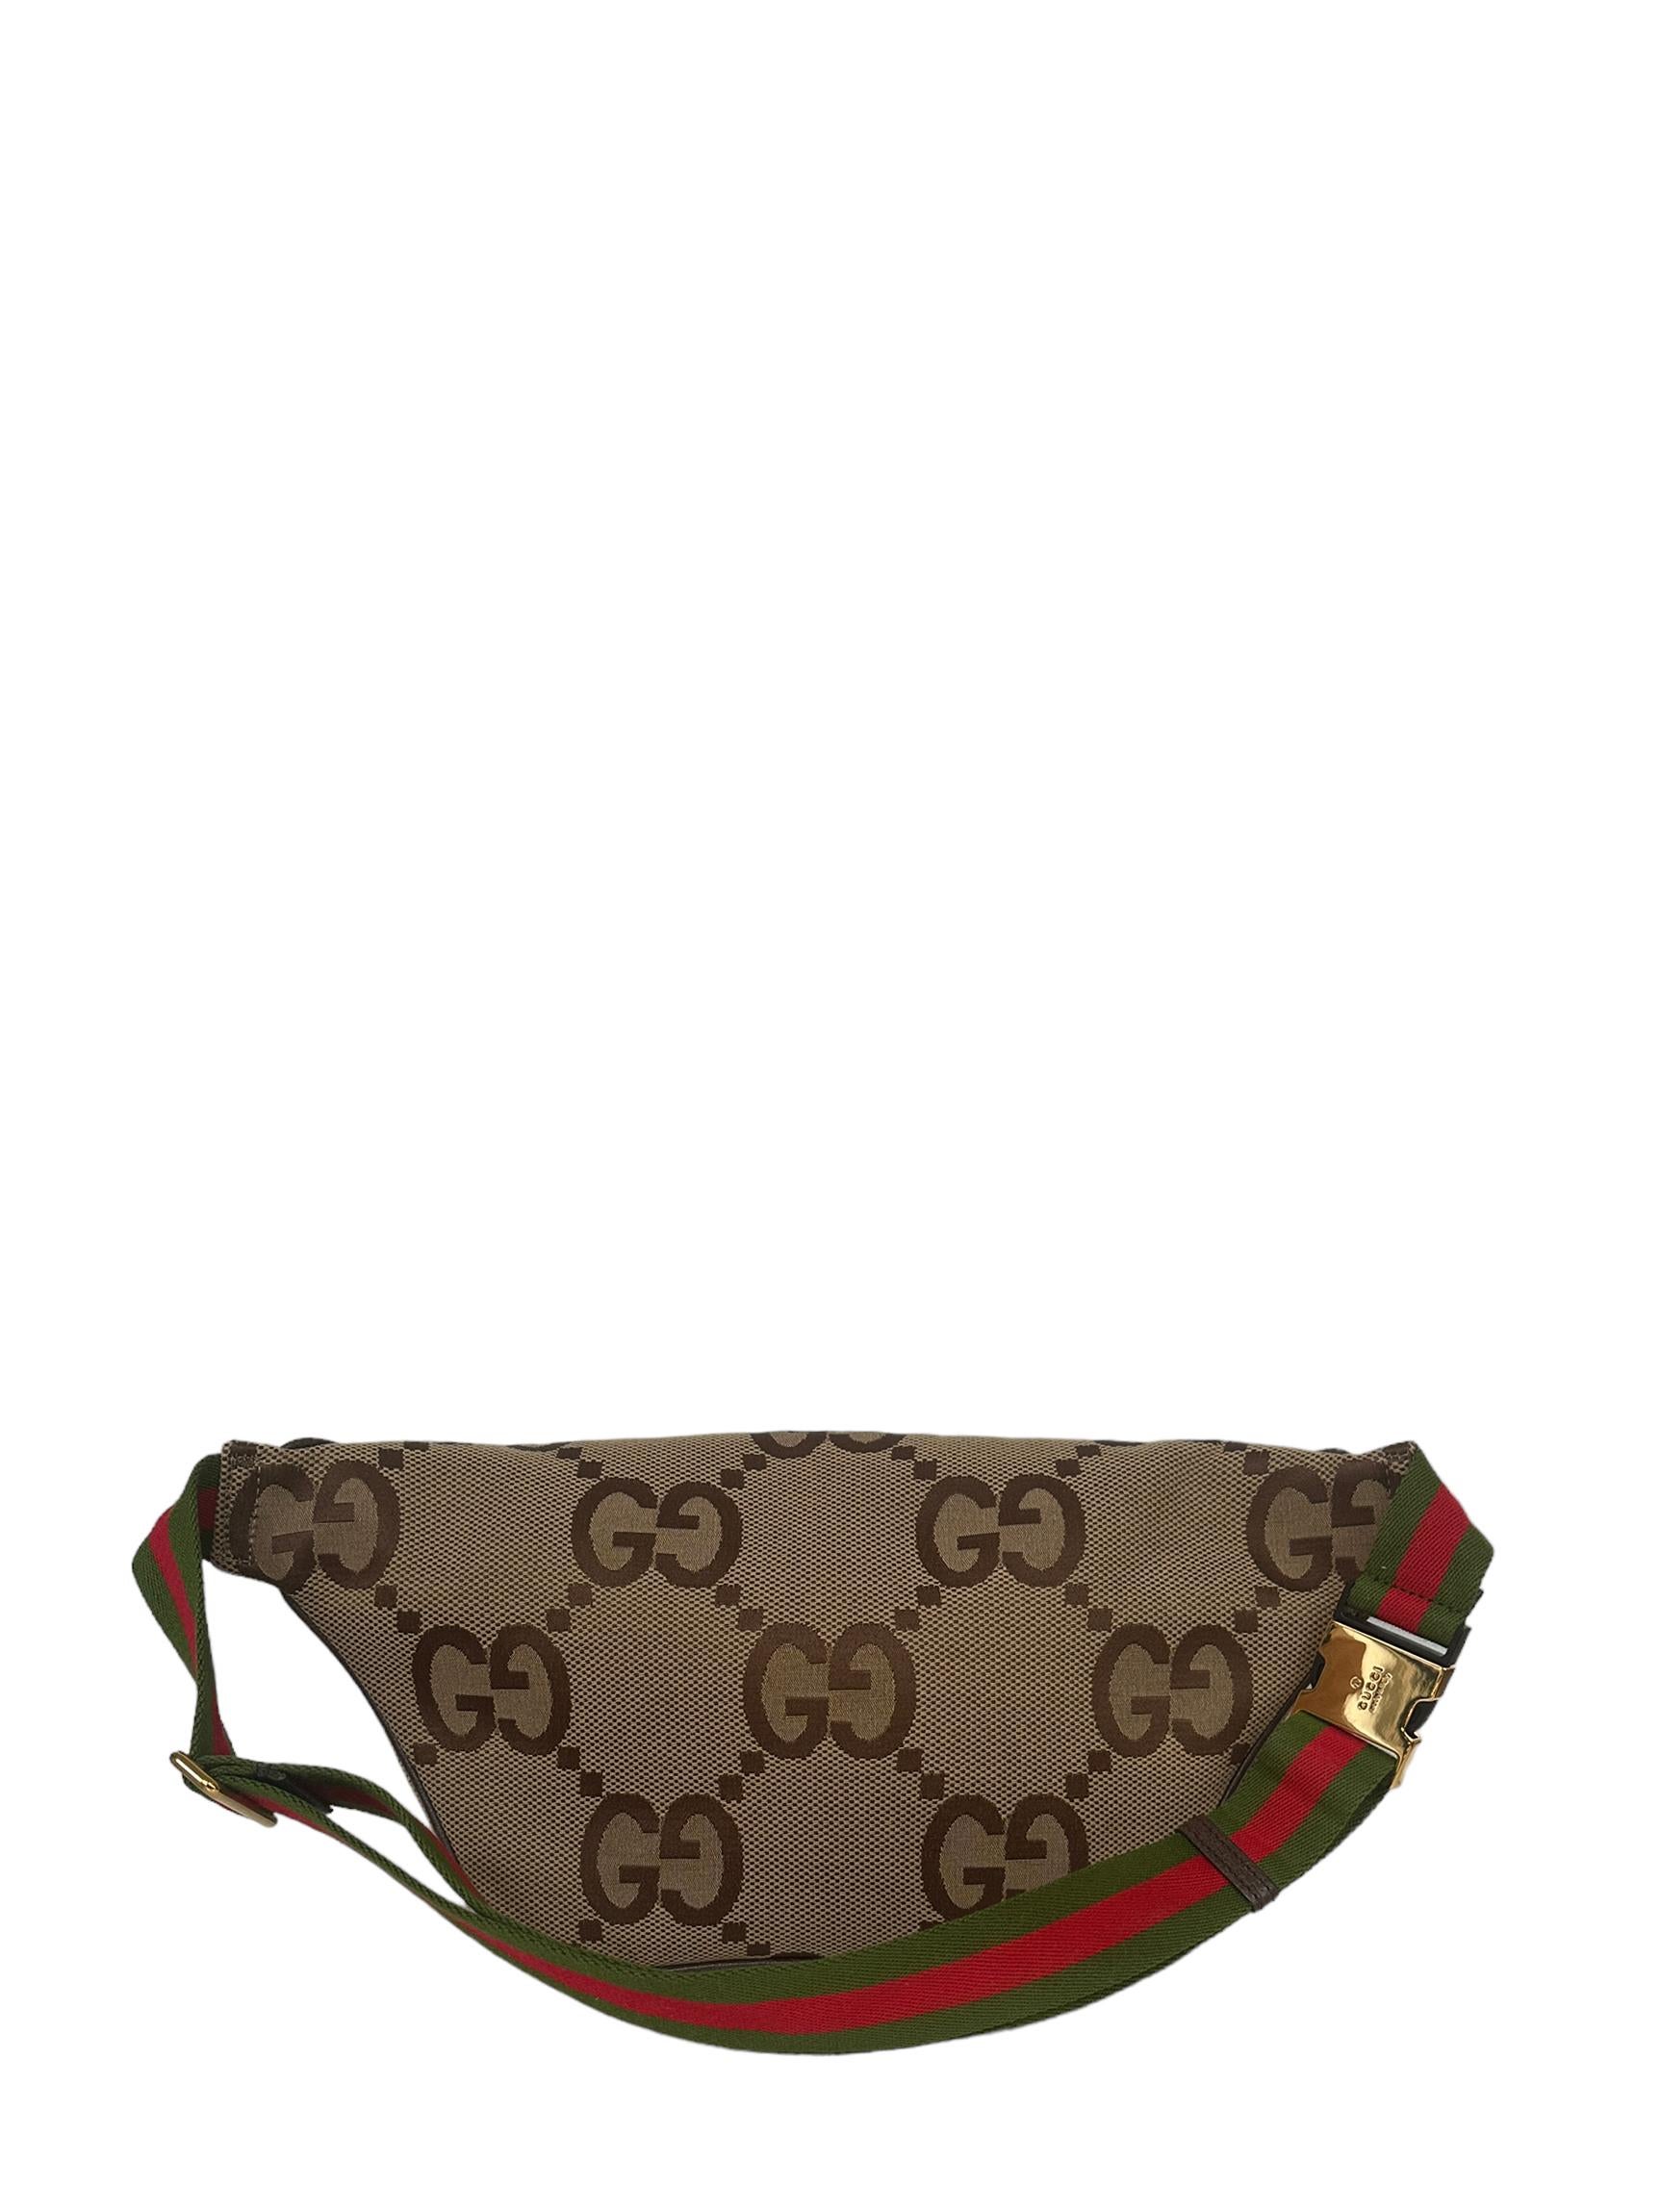 Gucci Monogram Jumbo GG Belt Bag

Made In: Italy
Color: Grown, red, green
Hardware: Goldtone
Materials: Canvas with leather trim
Lining: Beige fine textile
Closure/Opening: Zip
Exterior Pockets: N/A
Interior Pockets: None
Exterior Condition: